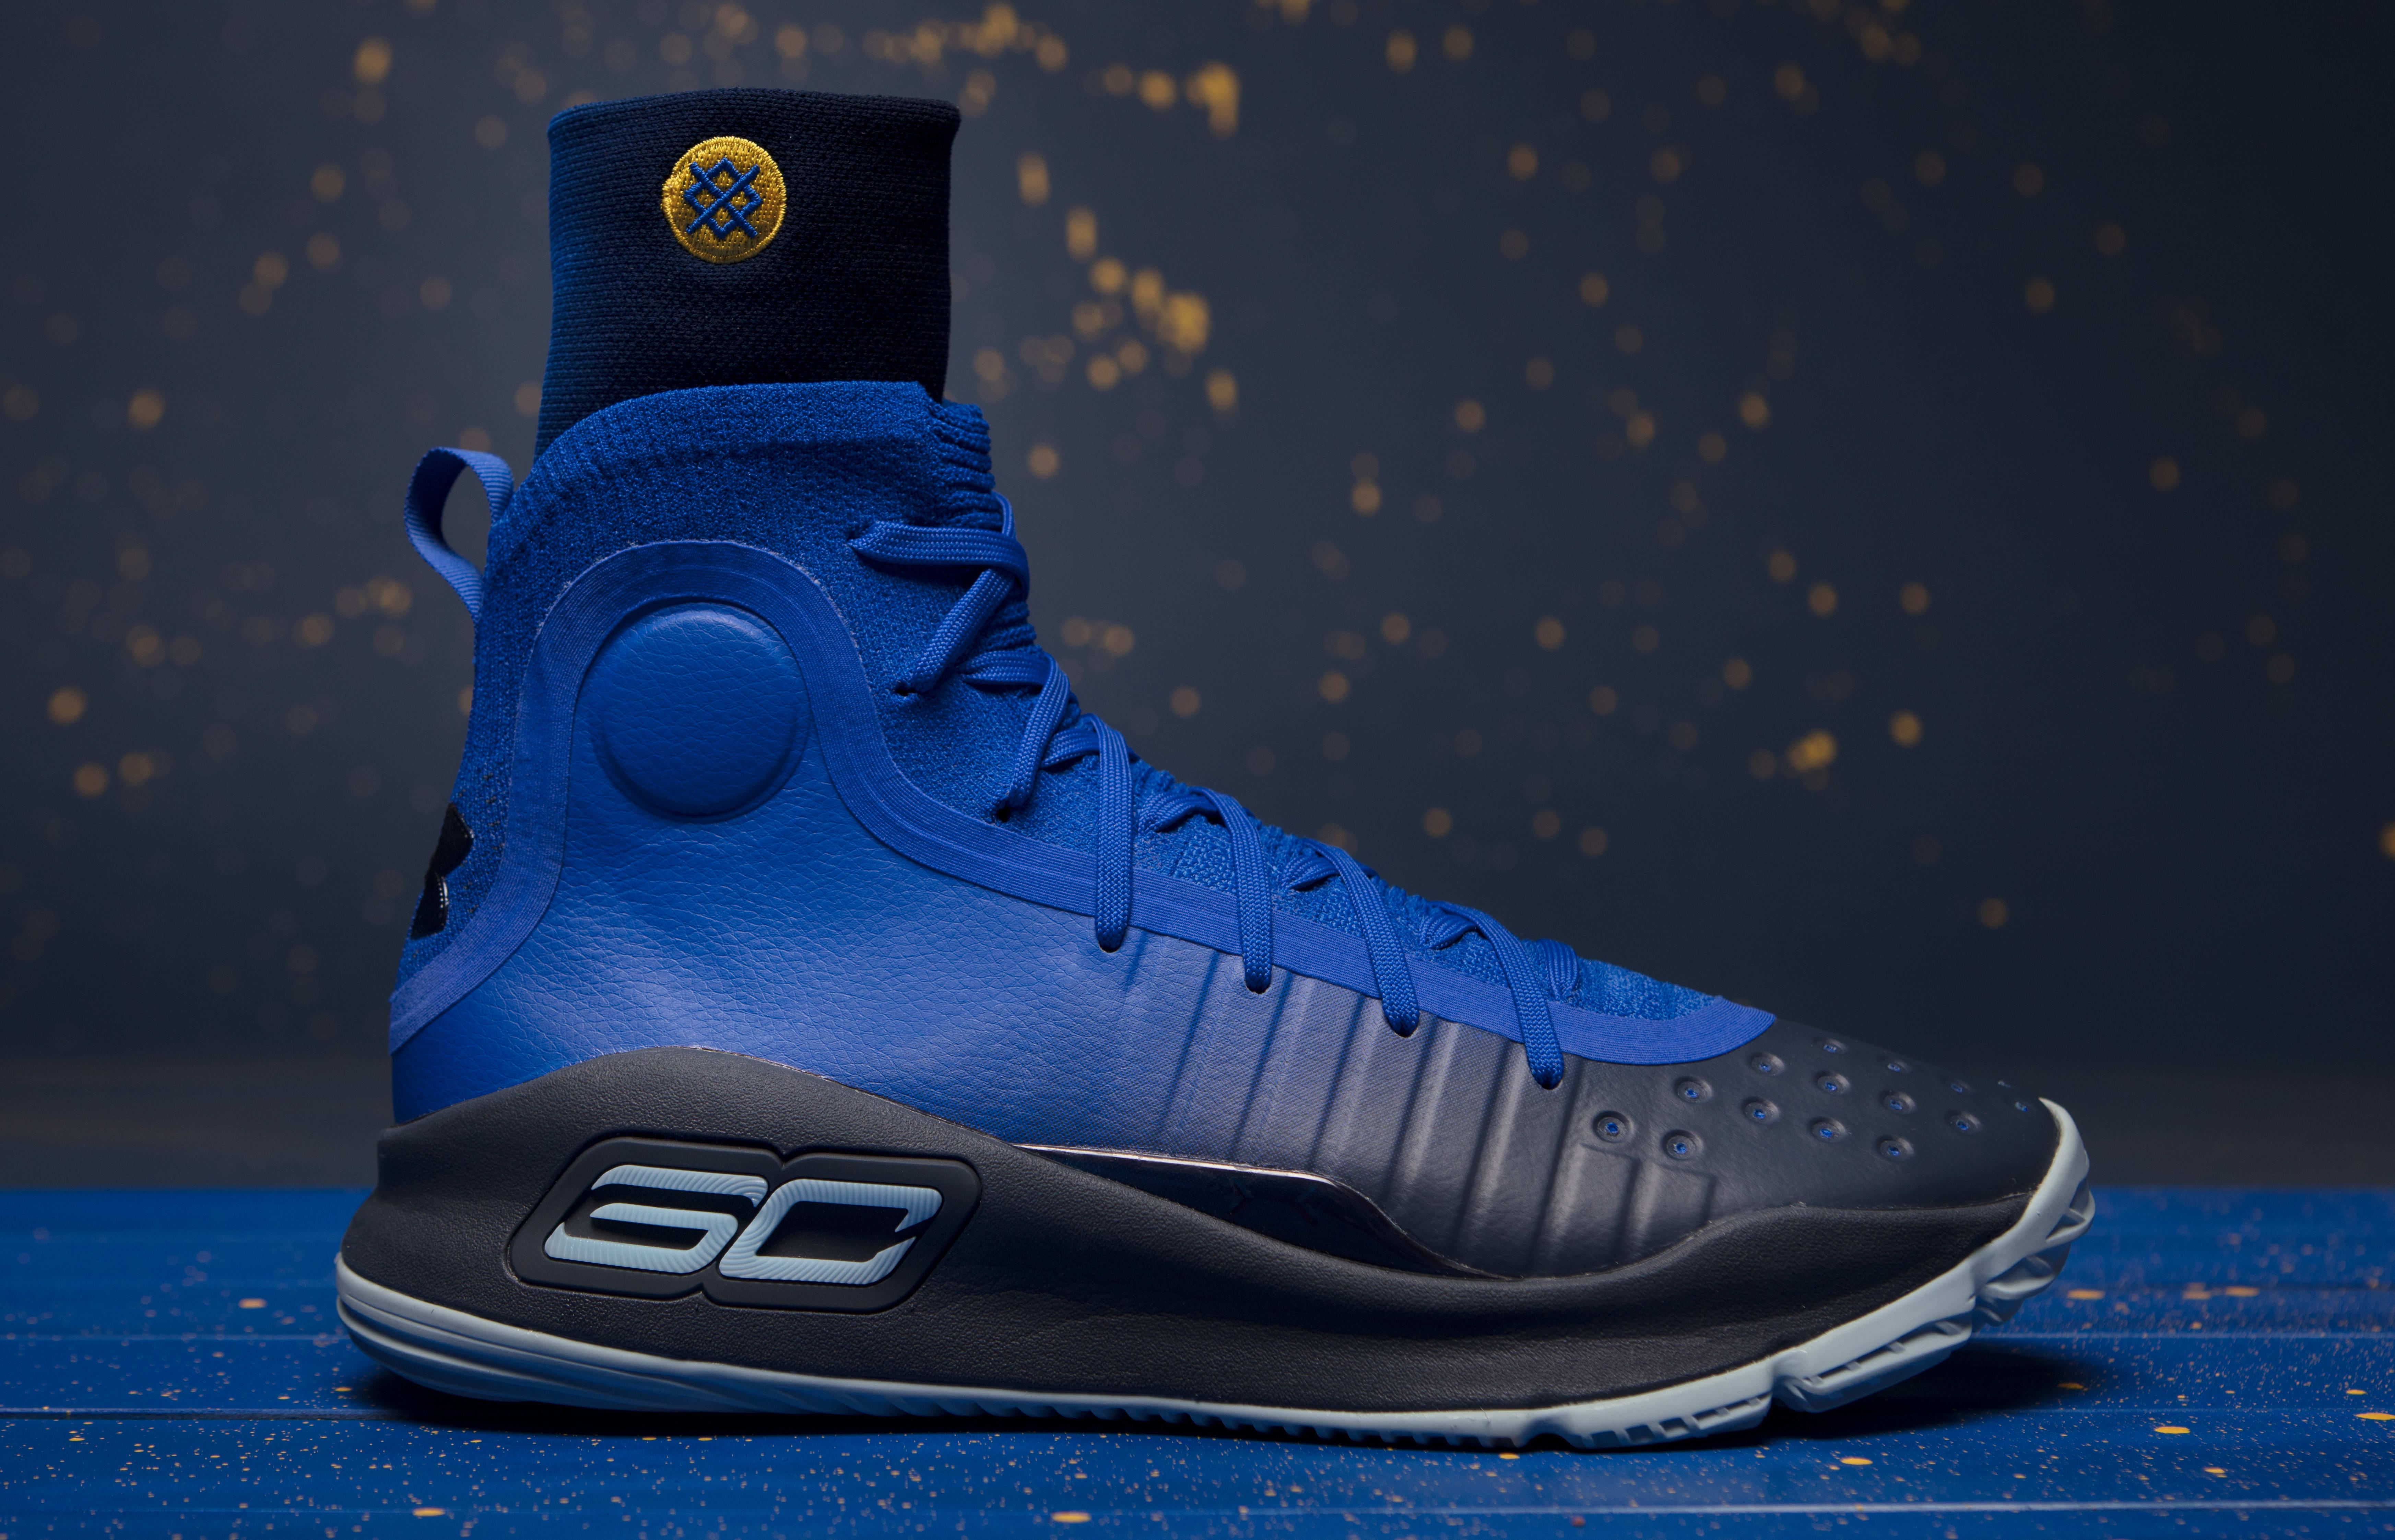 Under Armour Curry 4 'More Fun' 1298306 